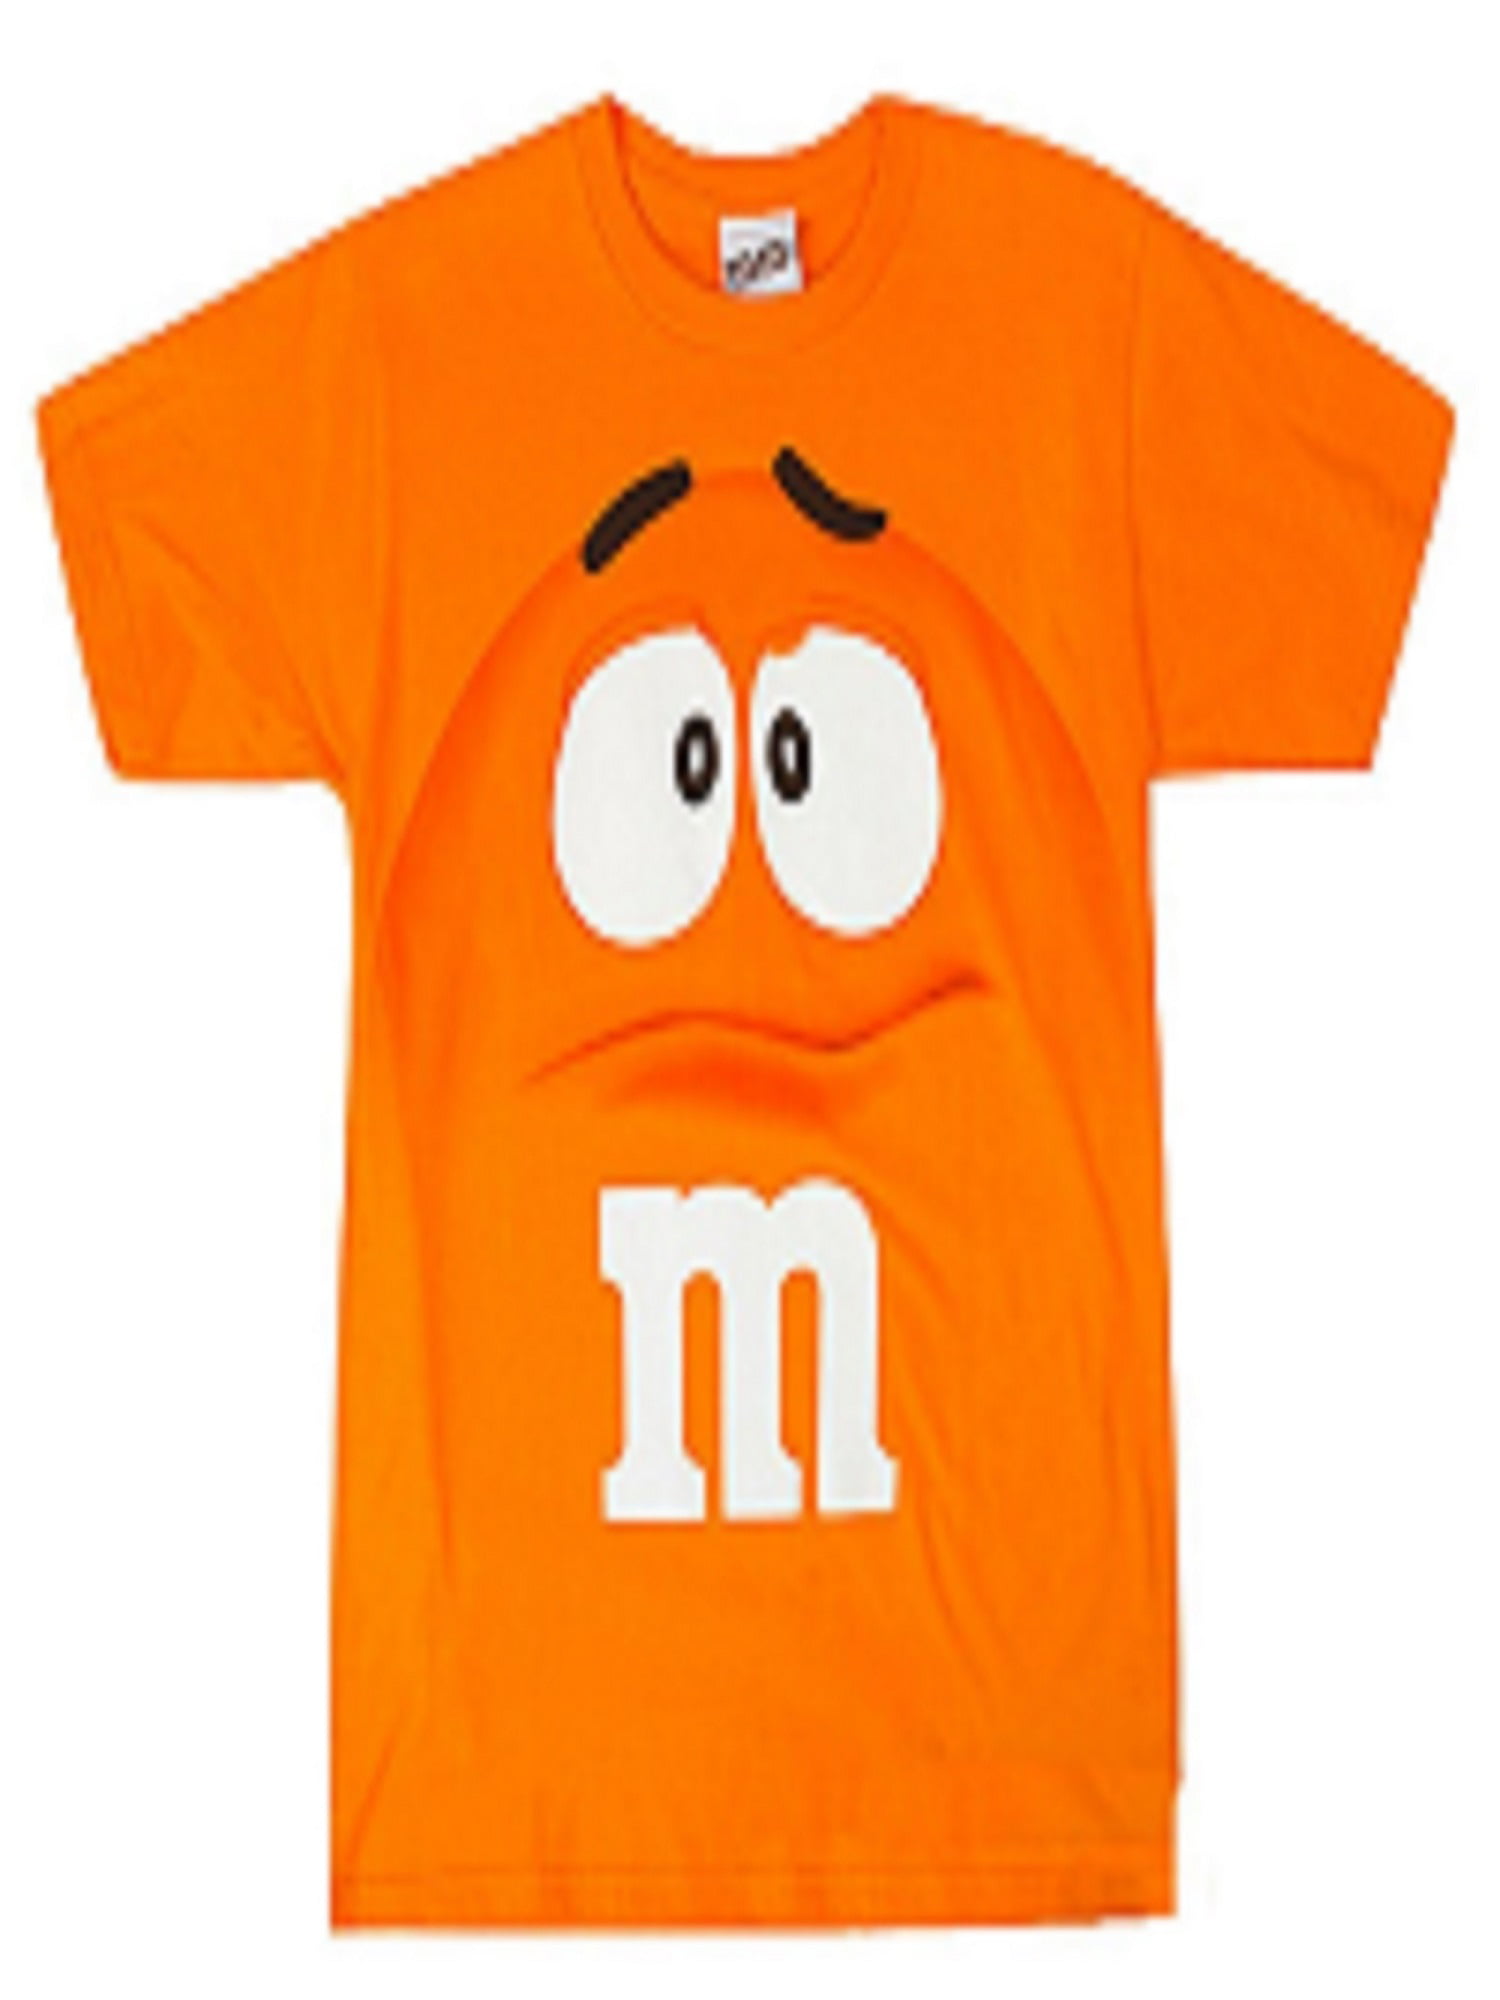 M&M M&M's Candy Silly Character Face T-Shirt (X-Small, Orange Face